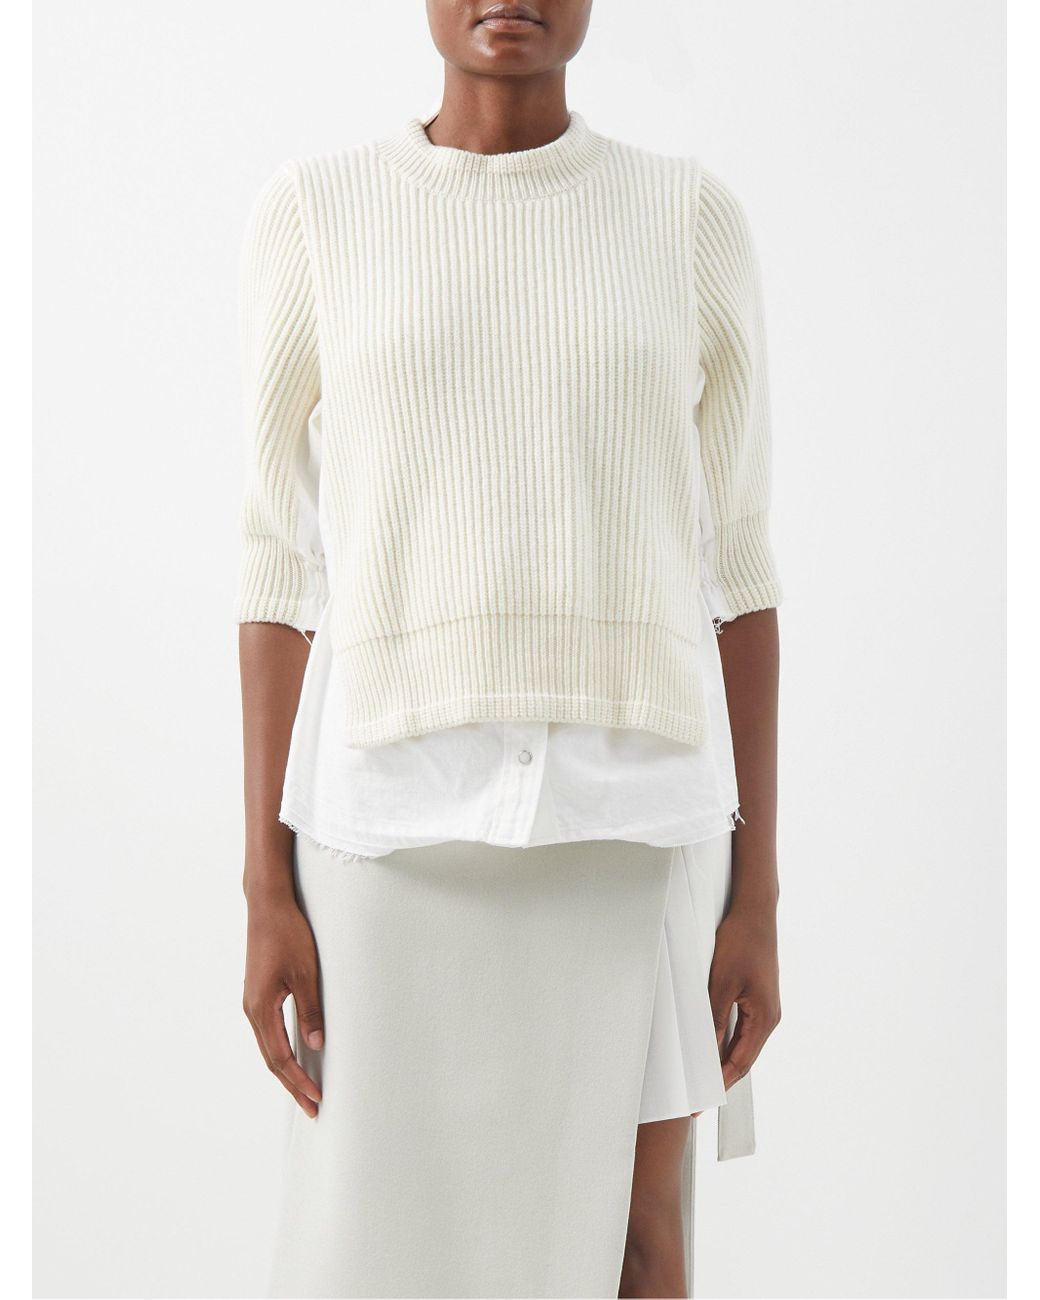 Sacai Ribbed-knit Wool And Denim Top in White | Lyst